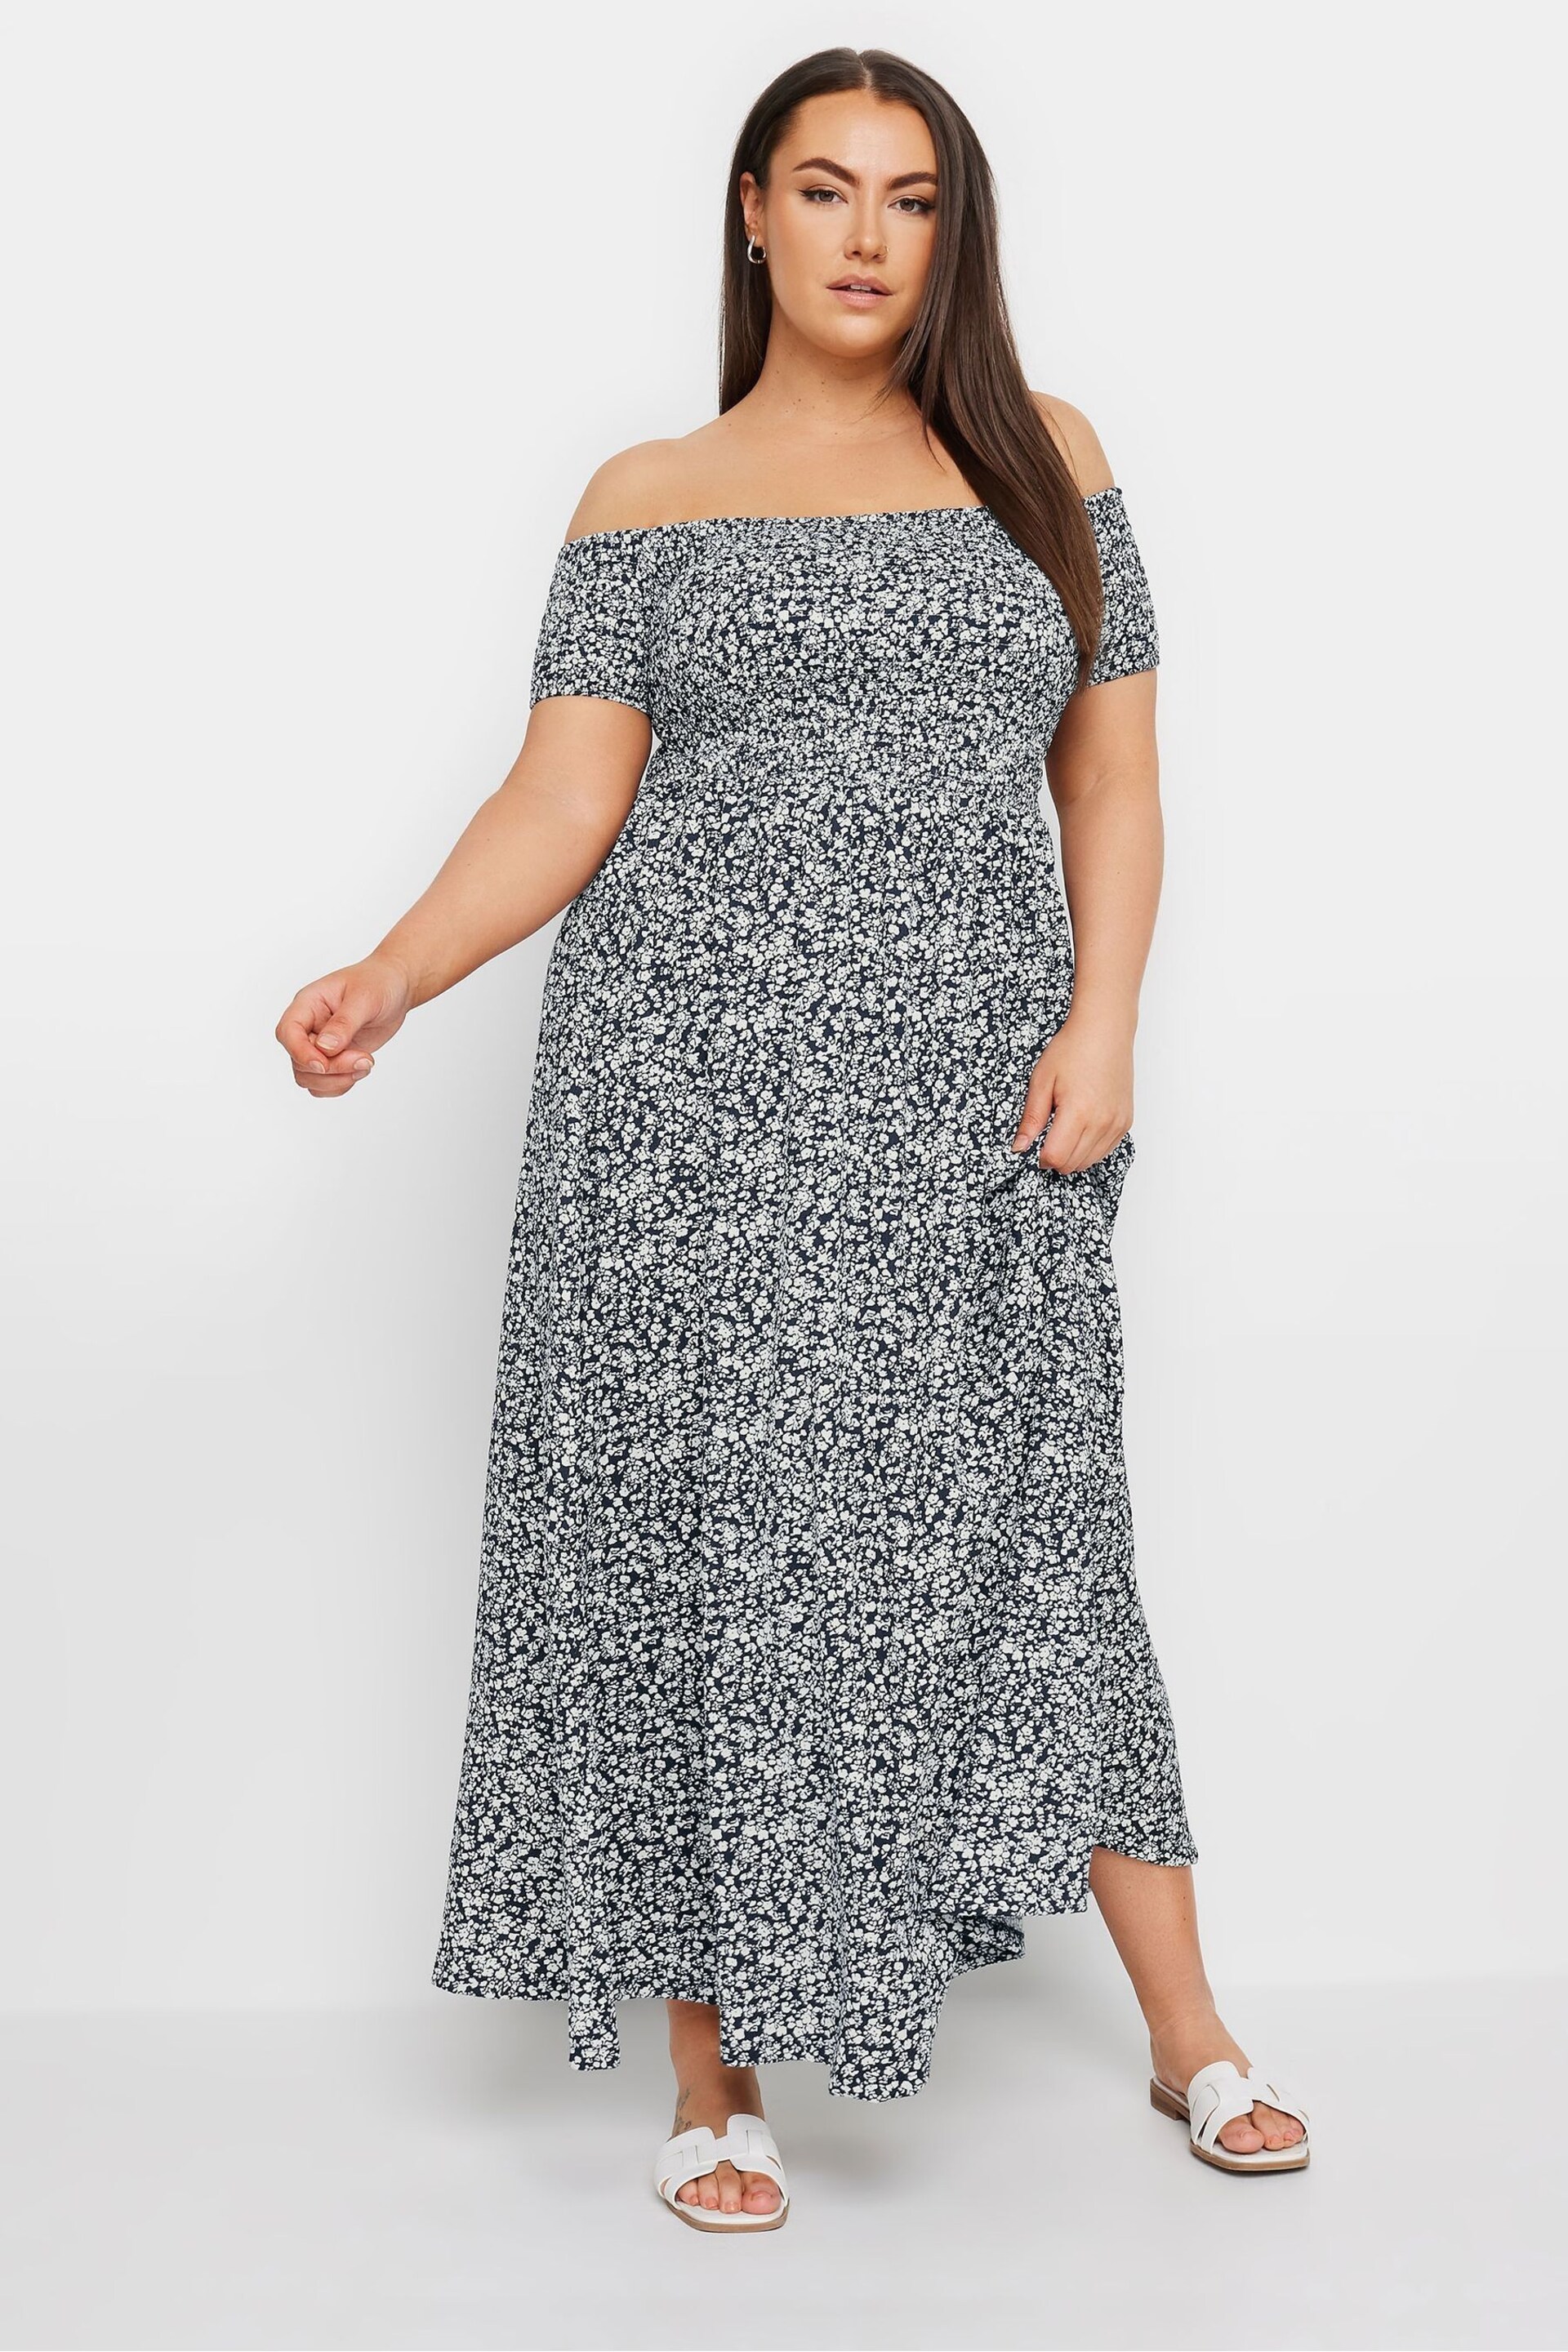 Yours Curve Blue Dark Ditsy Shirred Midaxi Dress - Image 2 of 5